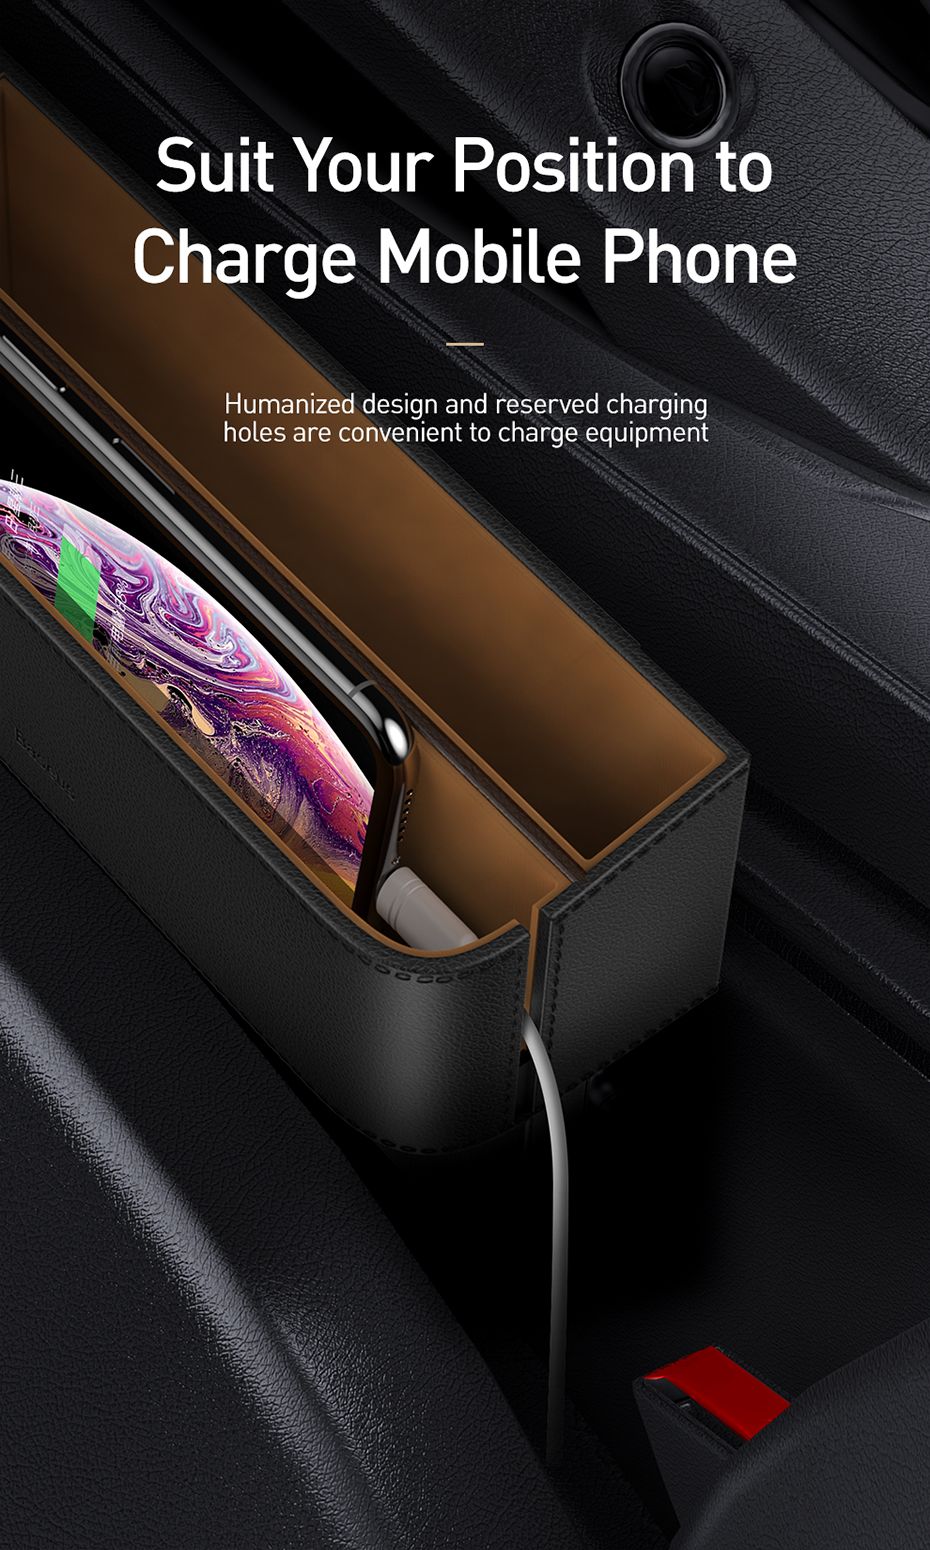 Baseus-Leather-Car-Seat-Organizer-Bag-Cup-Drink-Phone-Coin-Stowing-Tidying-Storage-Box-1577301